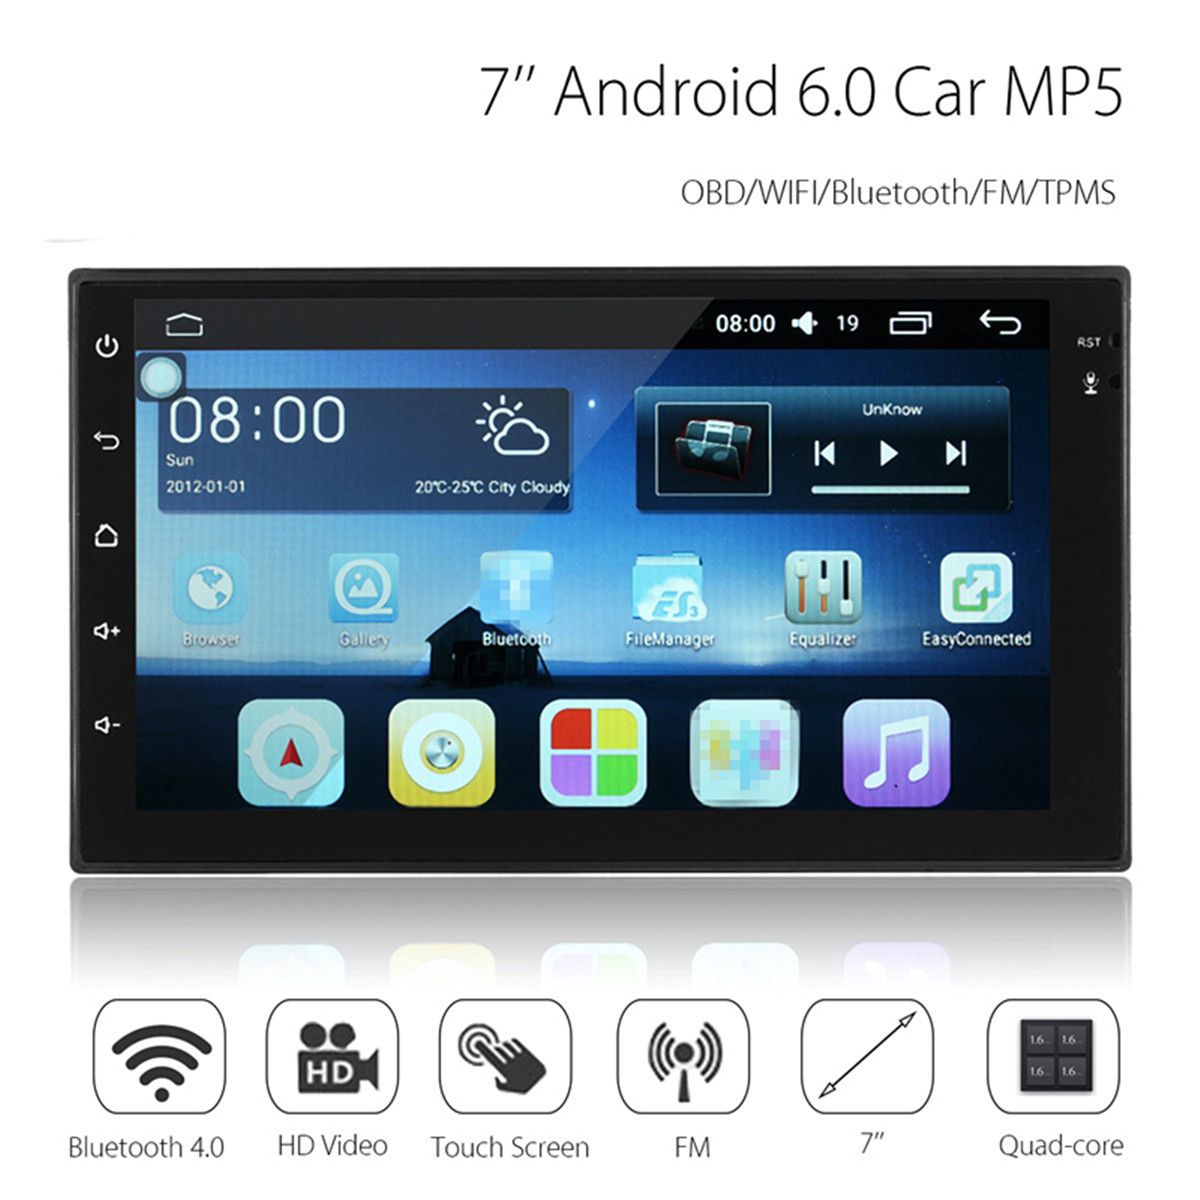 Android-7-Inch-2-Din-HD-Touch-Screen-WIFI-bluetooth-40-Mirror-Link-Car-Black-MP5-Player-OBD-1332594